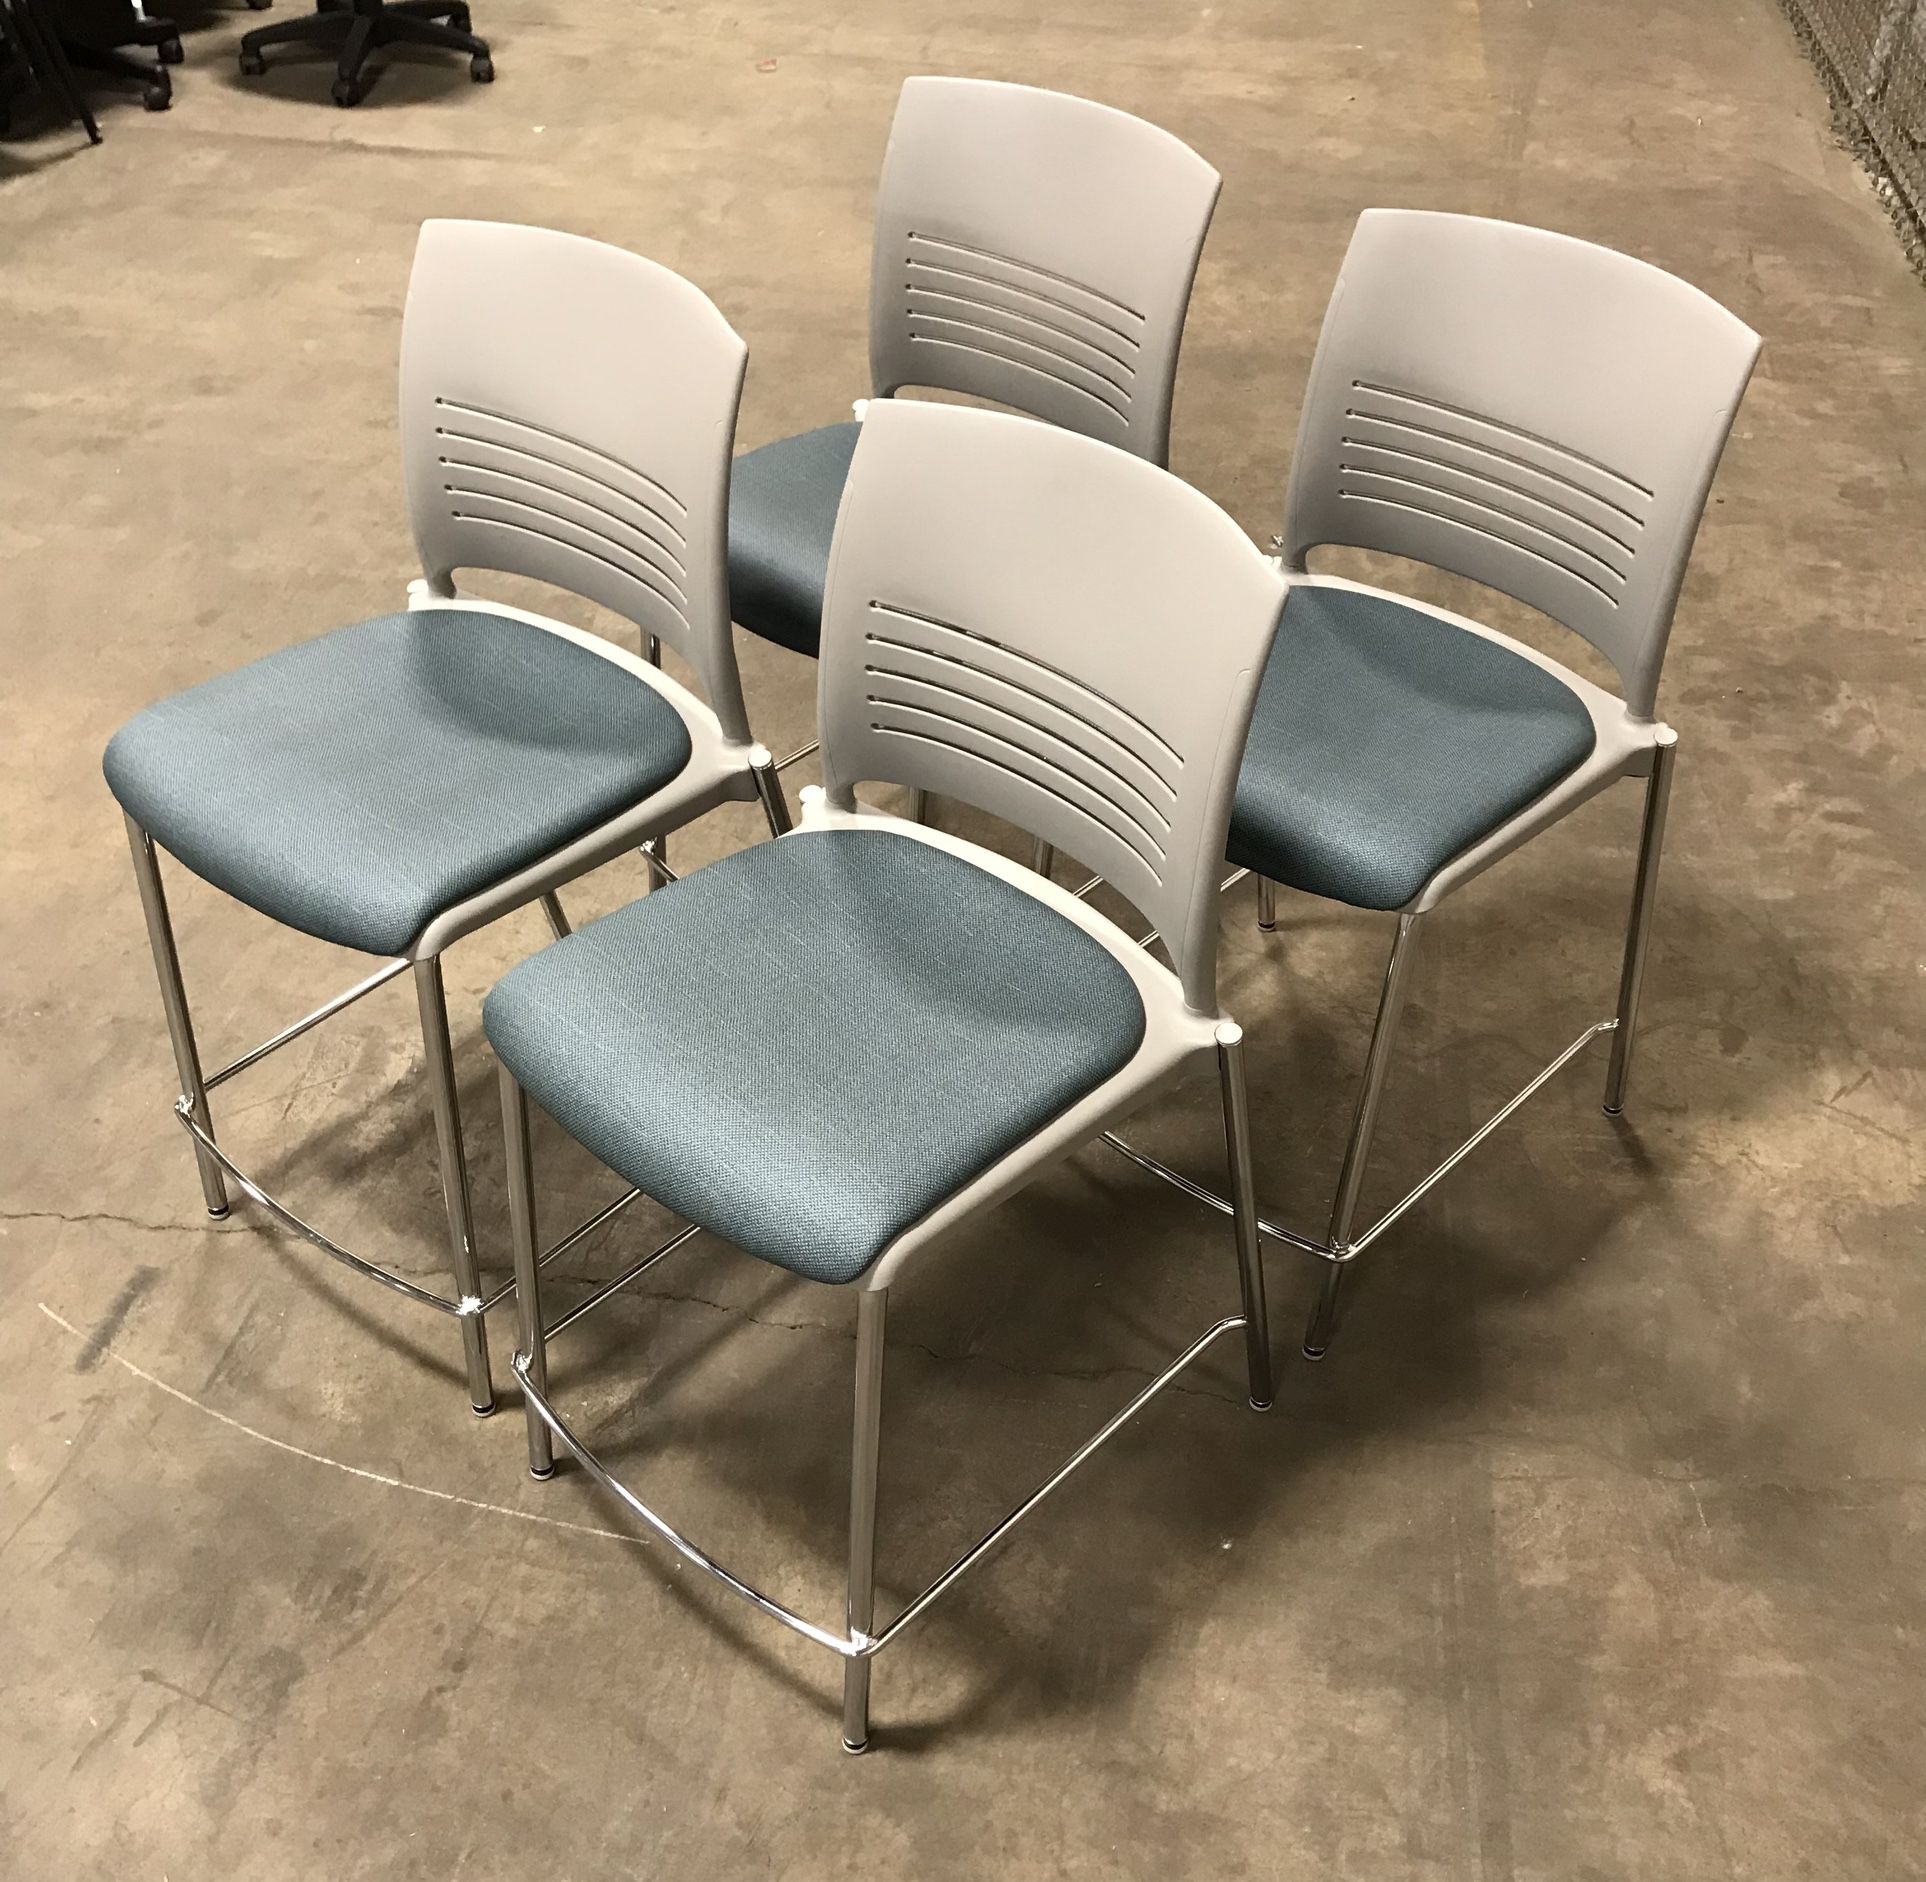 Office Chairs For Sale $75 For Each Chair- Excellent Condition (Tampa)